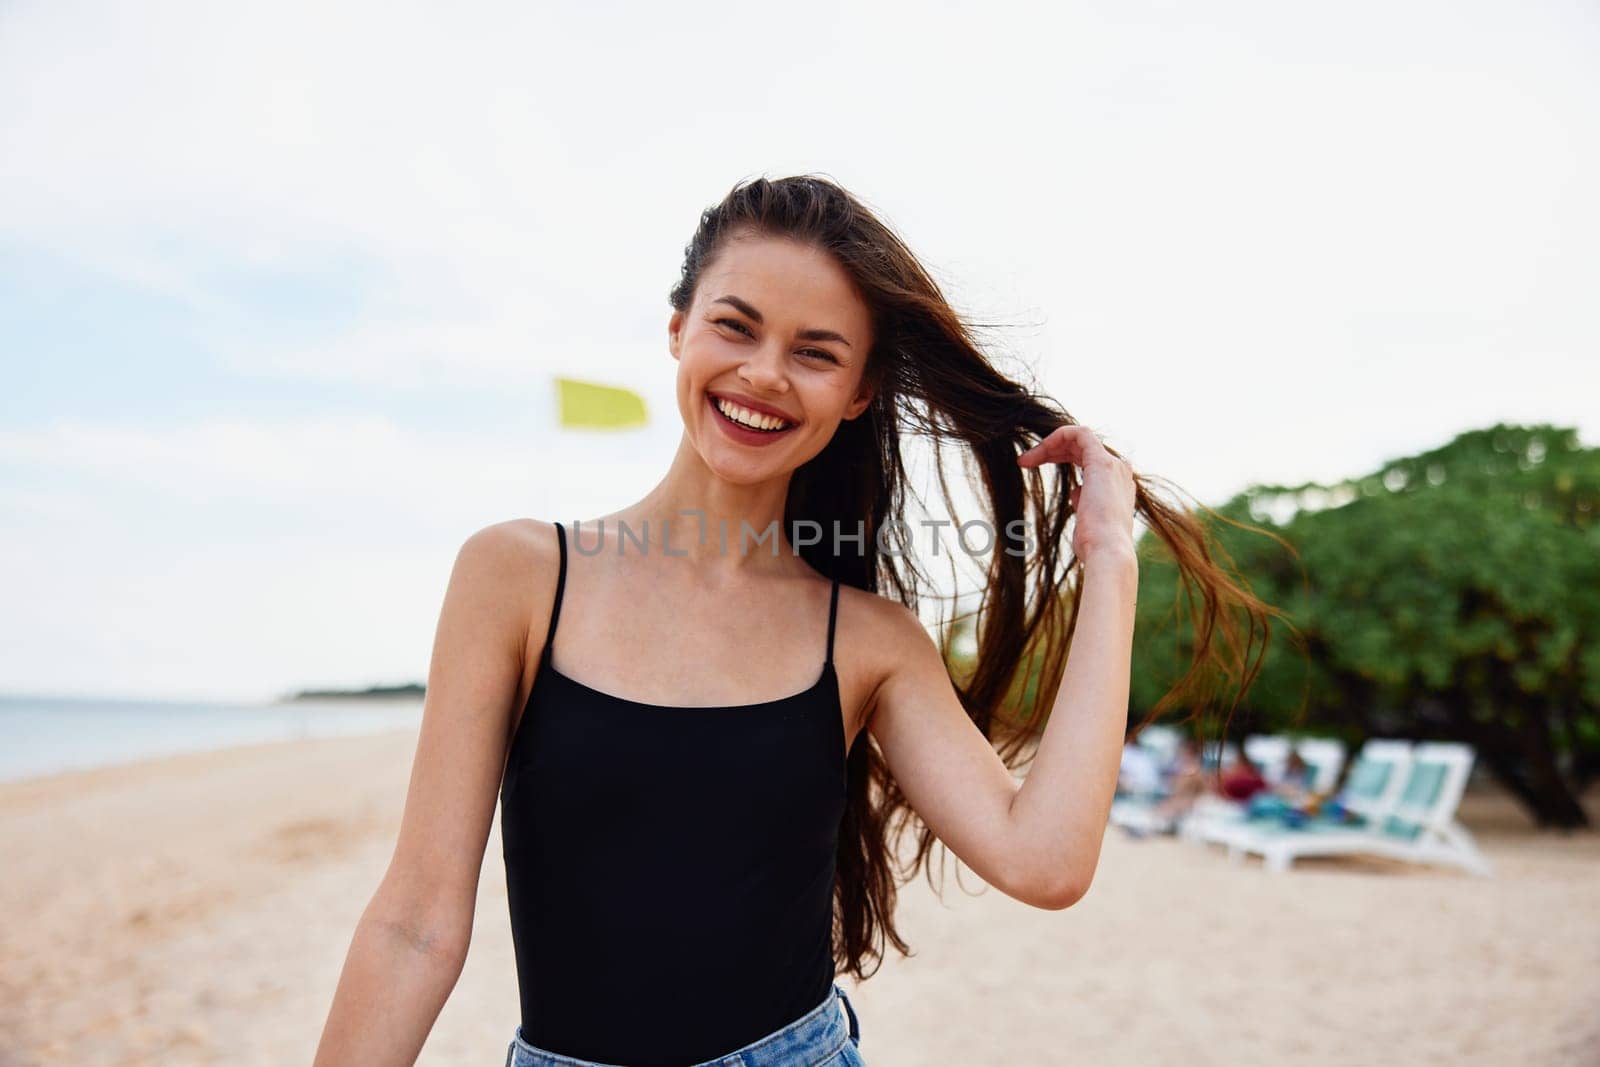 sea woman running beach nature smile water ocean relax summer sand holiday copy-space walk sunset vacation beautiful smiling carefree dress young